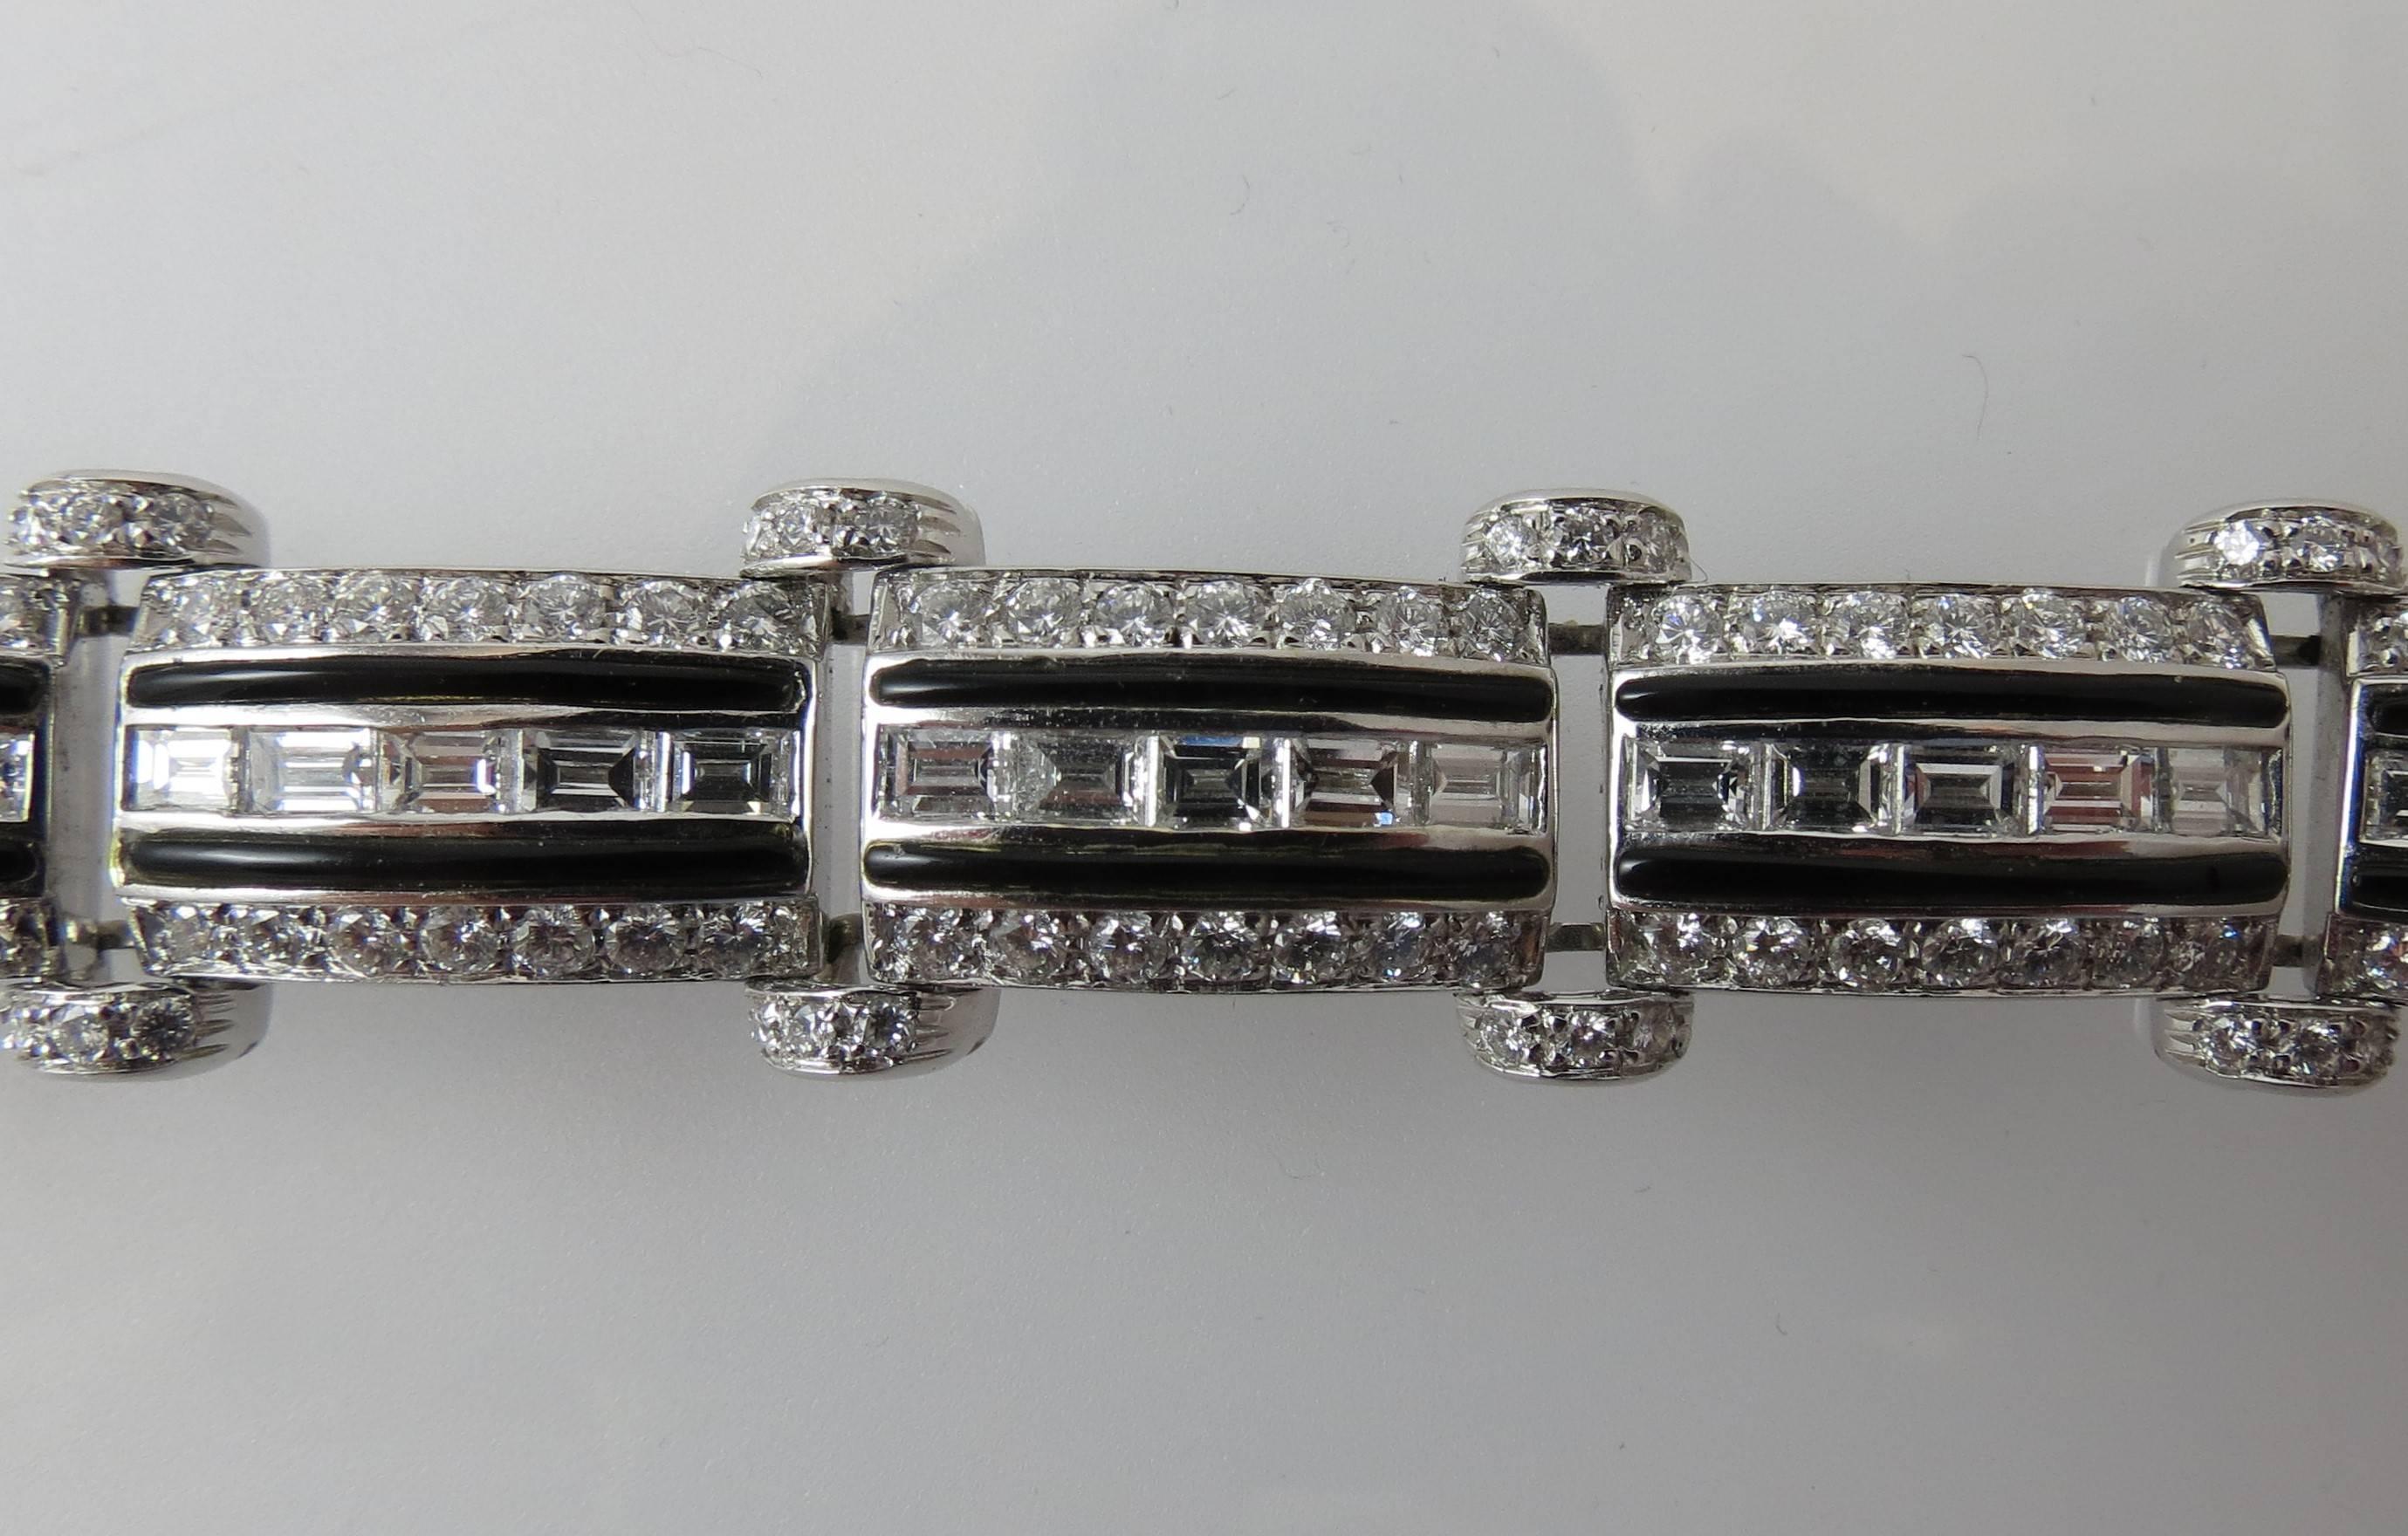 Picchiotti 18K white gold diamond and black onyx bracelet with 11 flexible links and 220 round diamonds weighing 3.82cts and 55 baguette diamonds weighing 5.84cts, G color, VS clarity, 7.75 inches long and .50 inches wide.
